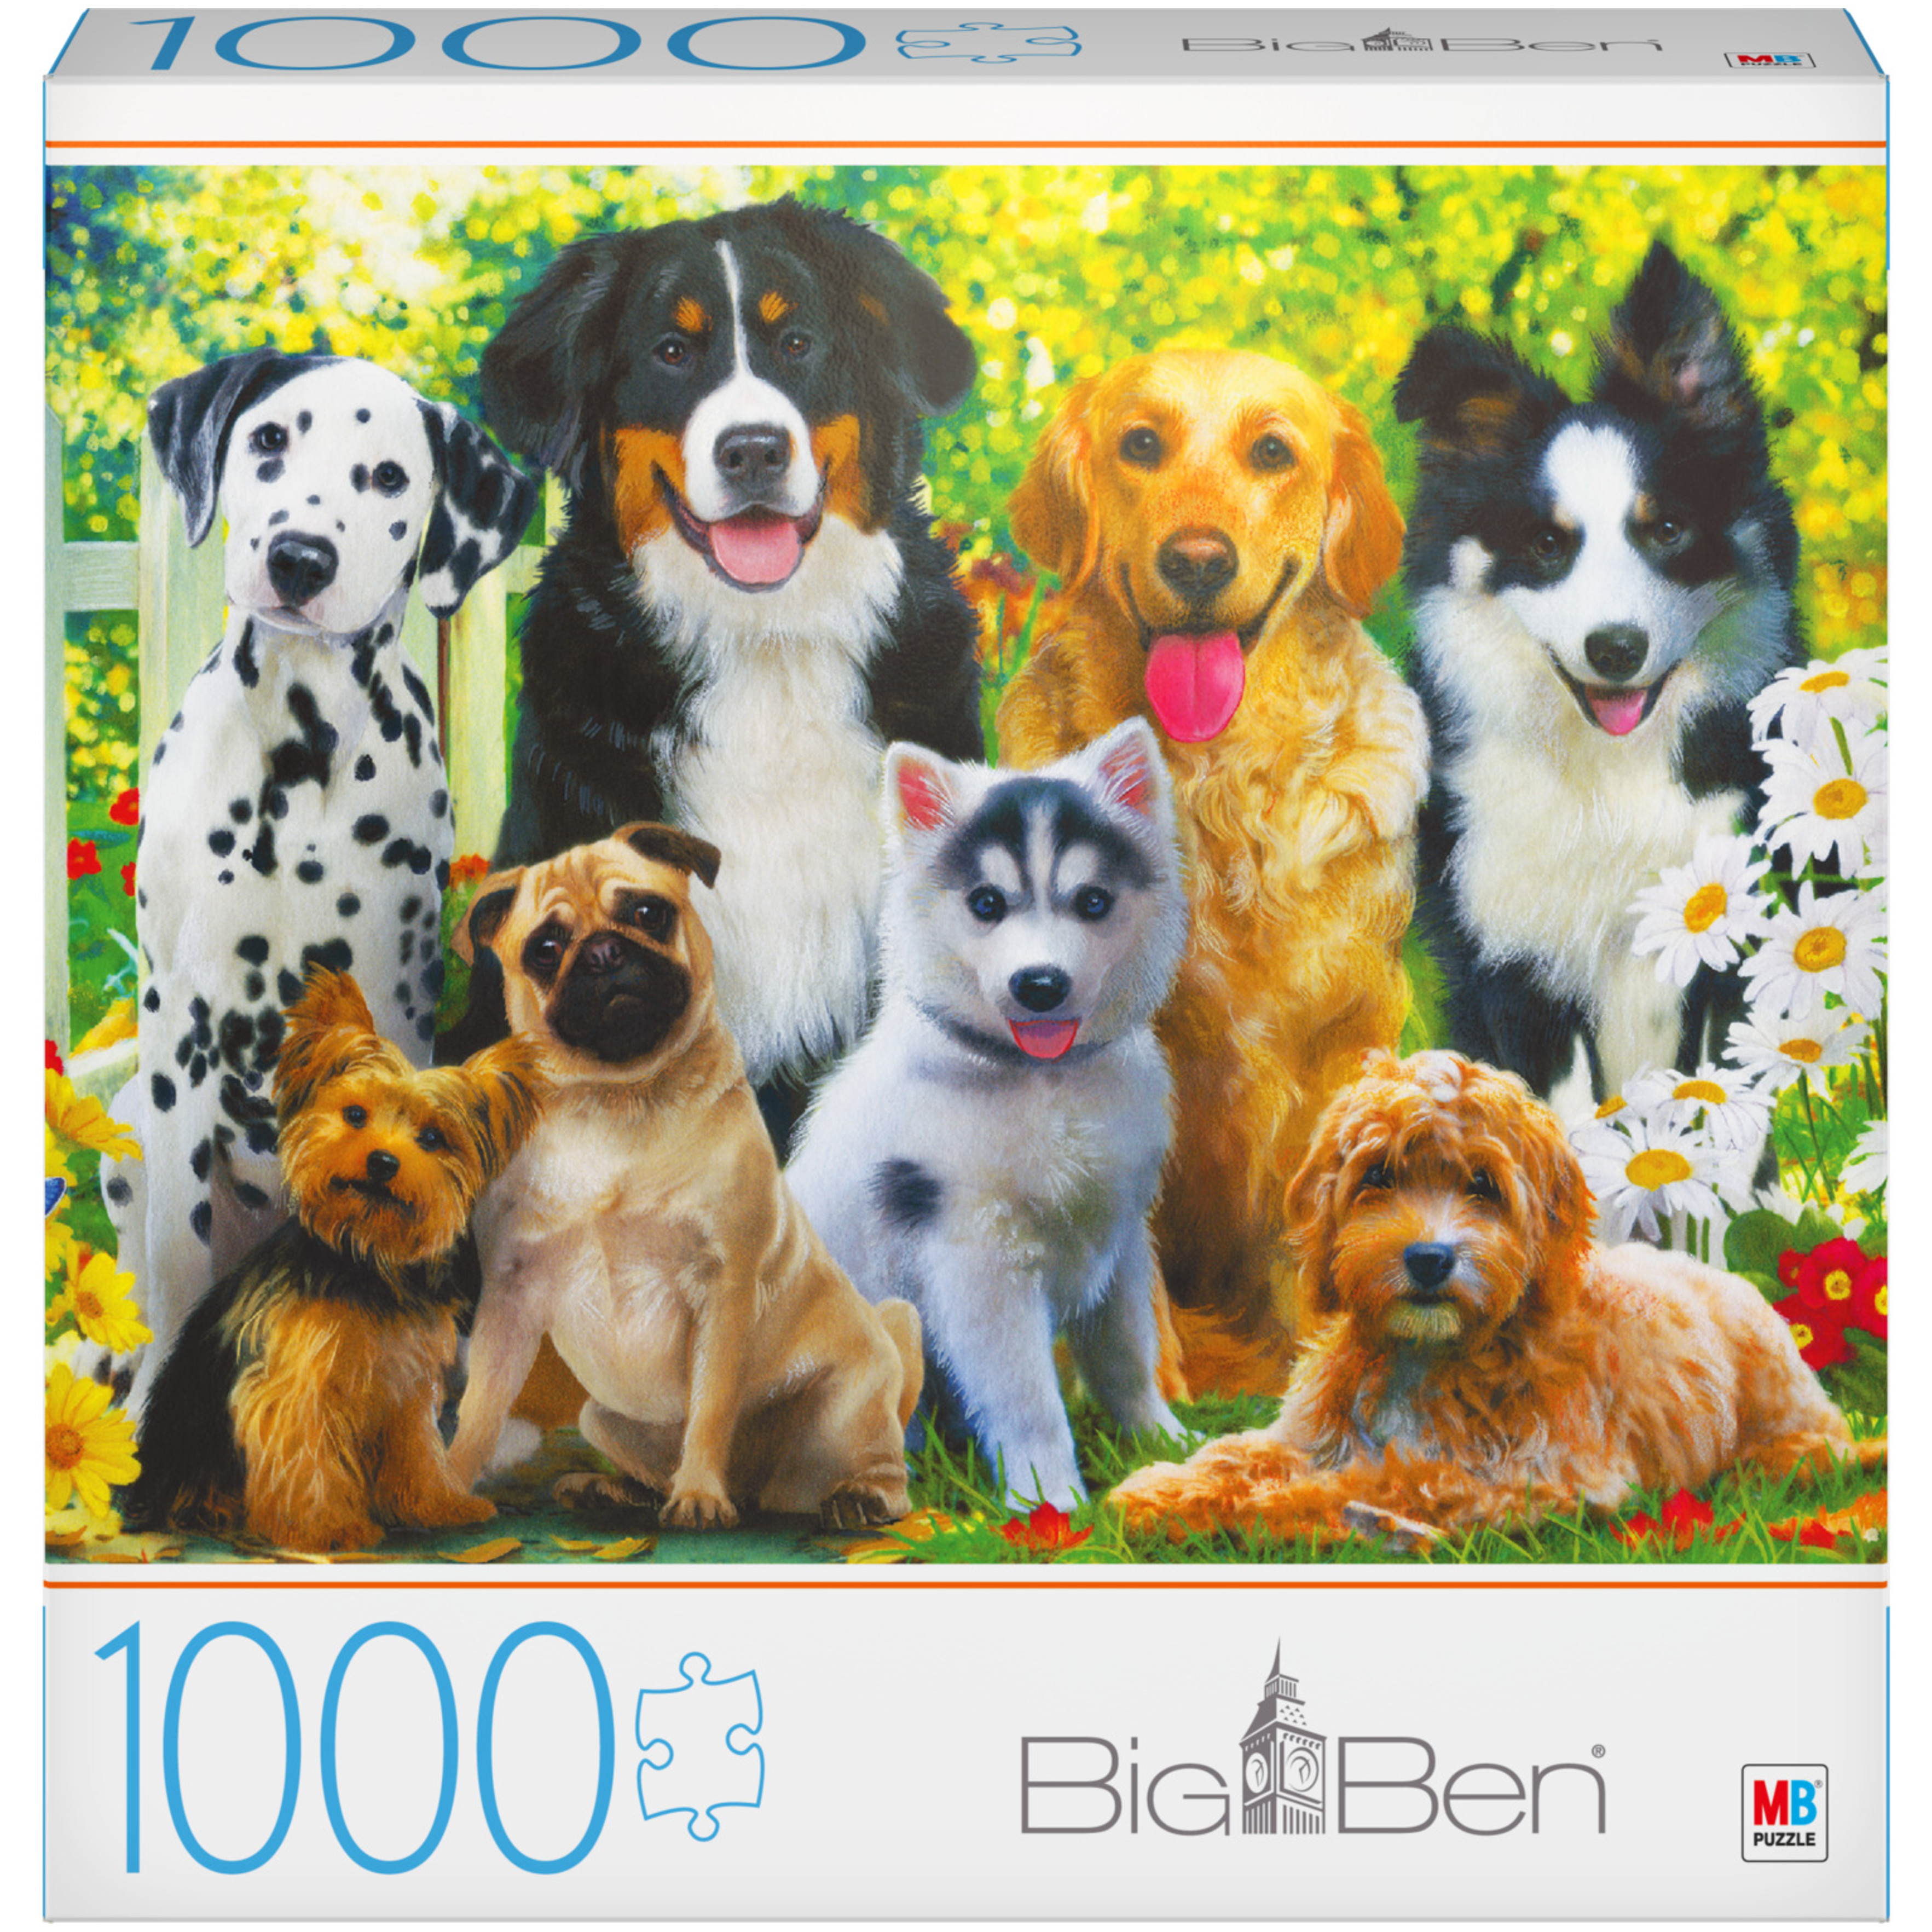 Big Ben Milton Bradley 1000-Piece Jigsaw Puzzle, for Adults and Kids Ages 8 and up (Styles Will Vary) - image 5 of 8